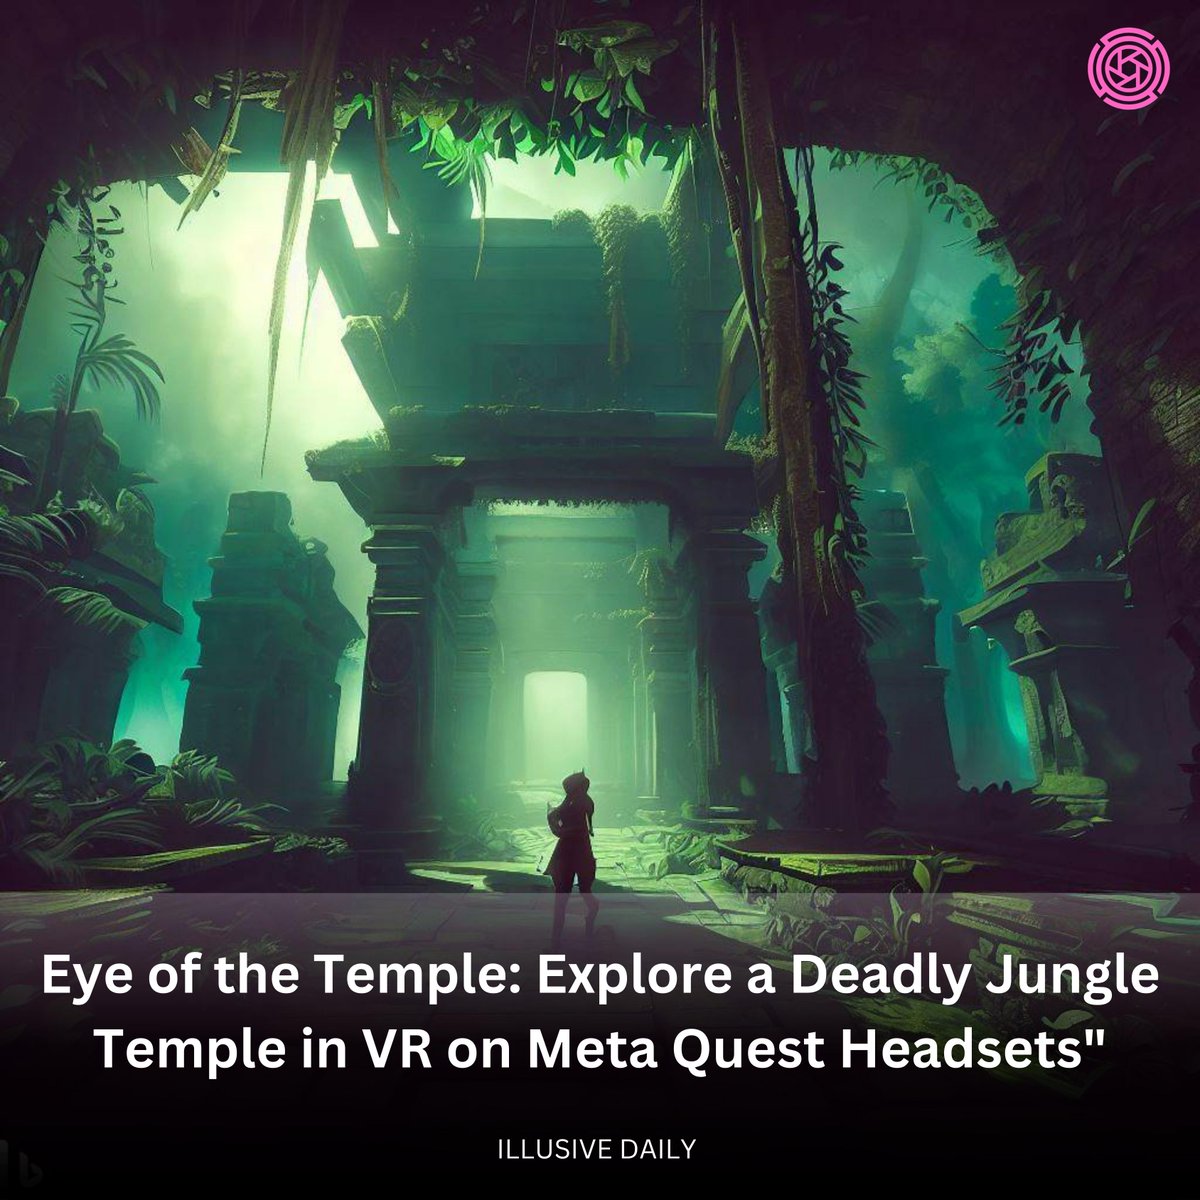 Are you ready for an immersive VR adventure that will transport you to a deadly jungle temple,
Discover more on our website through the link in our bio.

#Viral #Trending #news #blog #VRgaming #VirtualReality #JungleTemple #TreasureHunting #Speedrunning #ActionAdventure